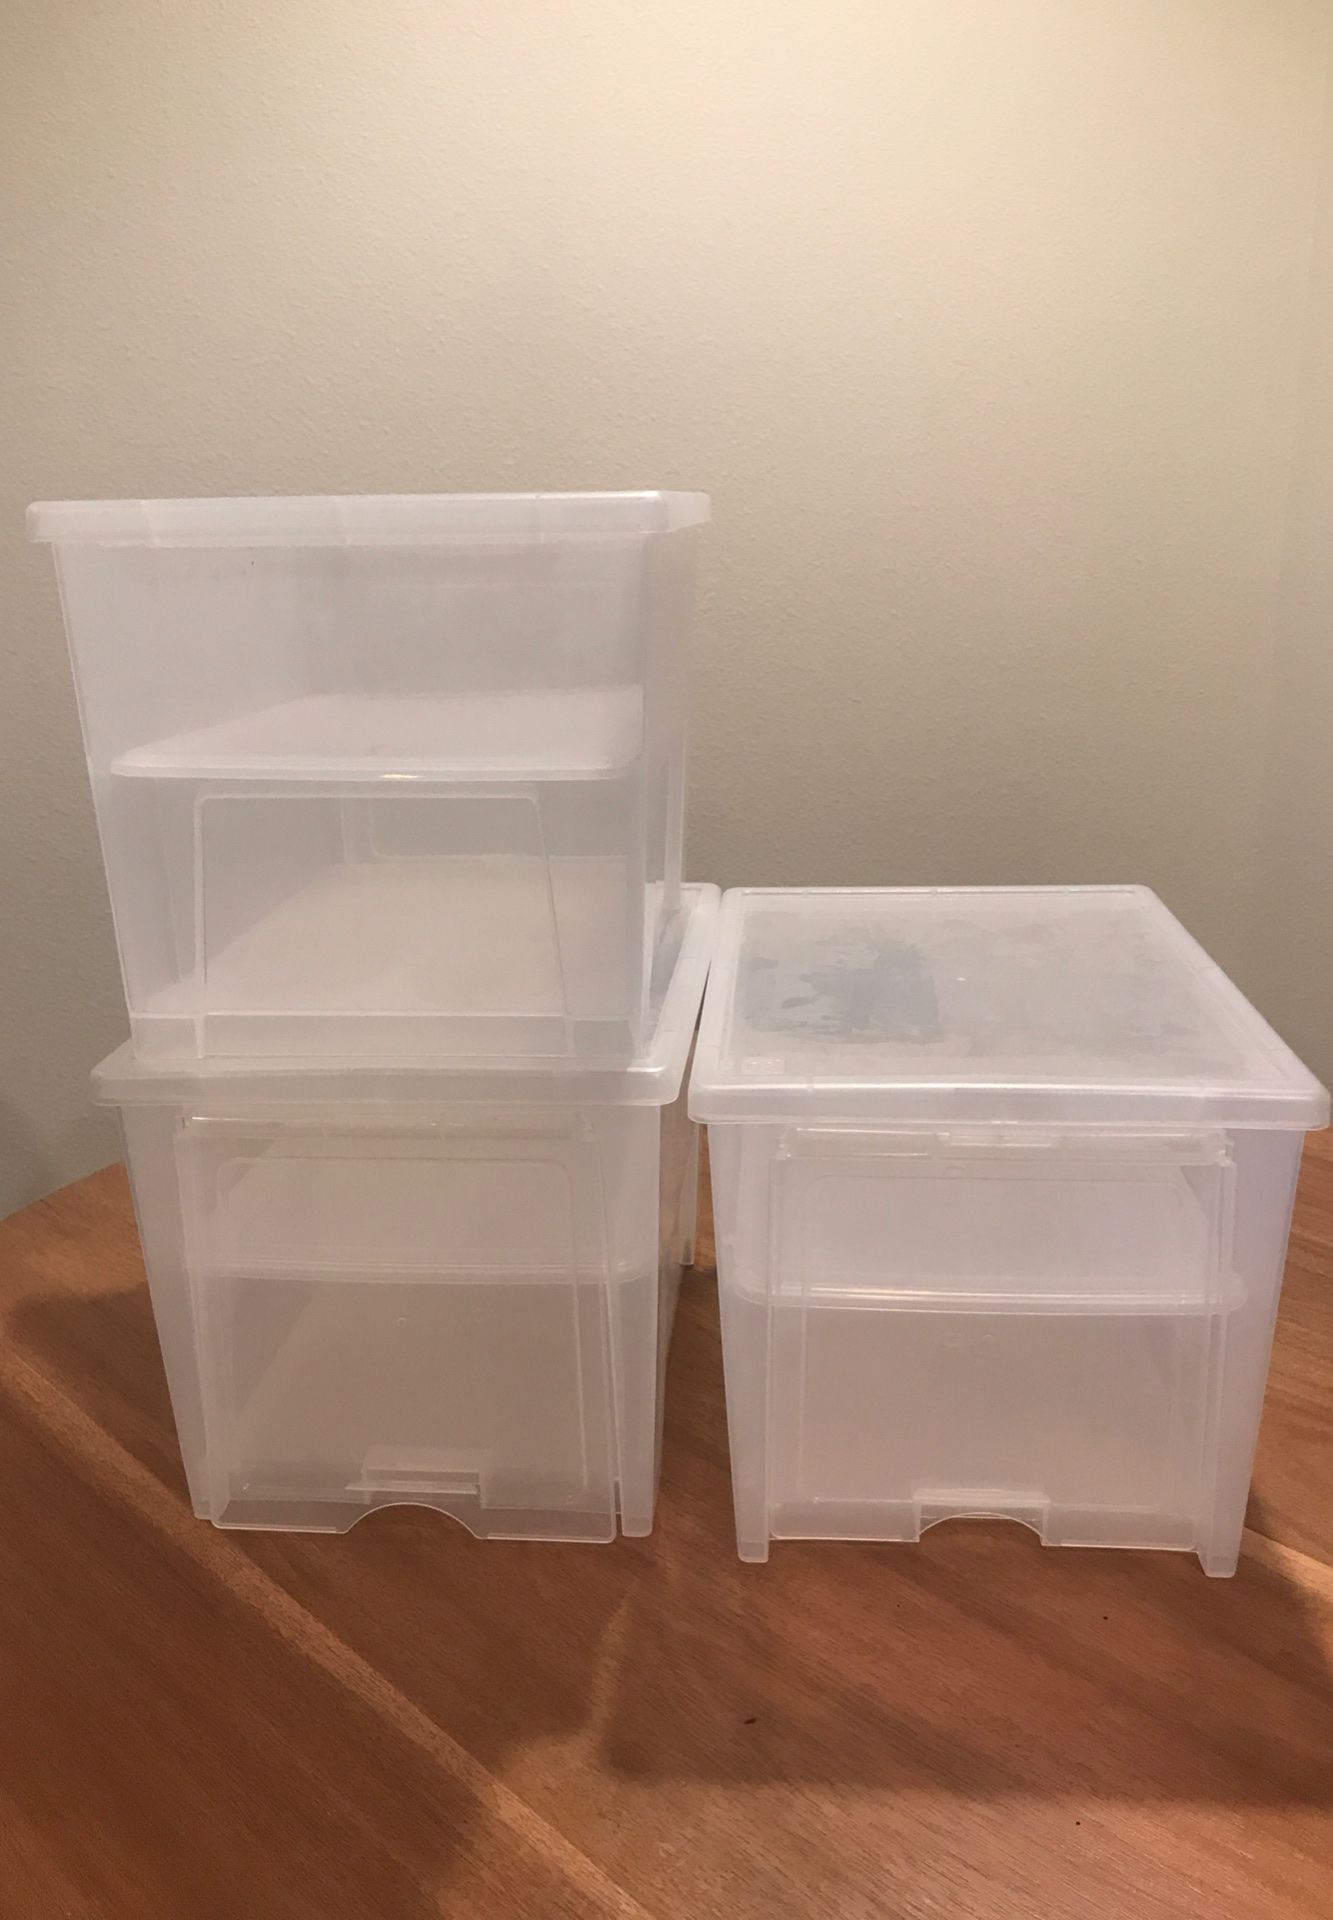 Shoe storage display/container